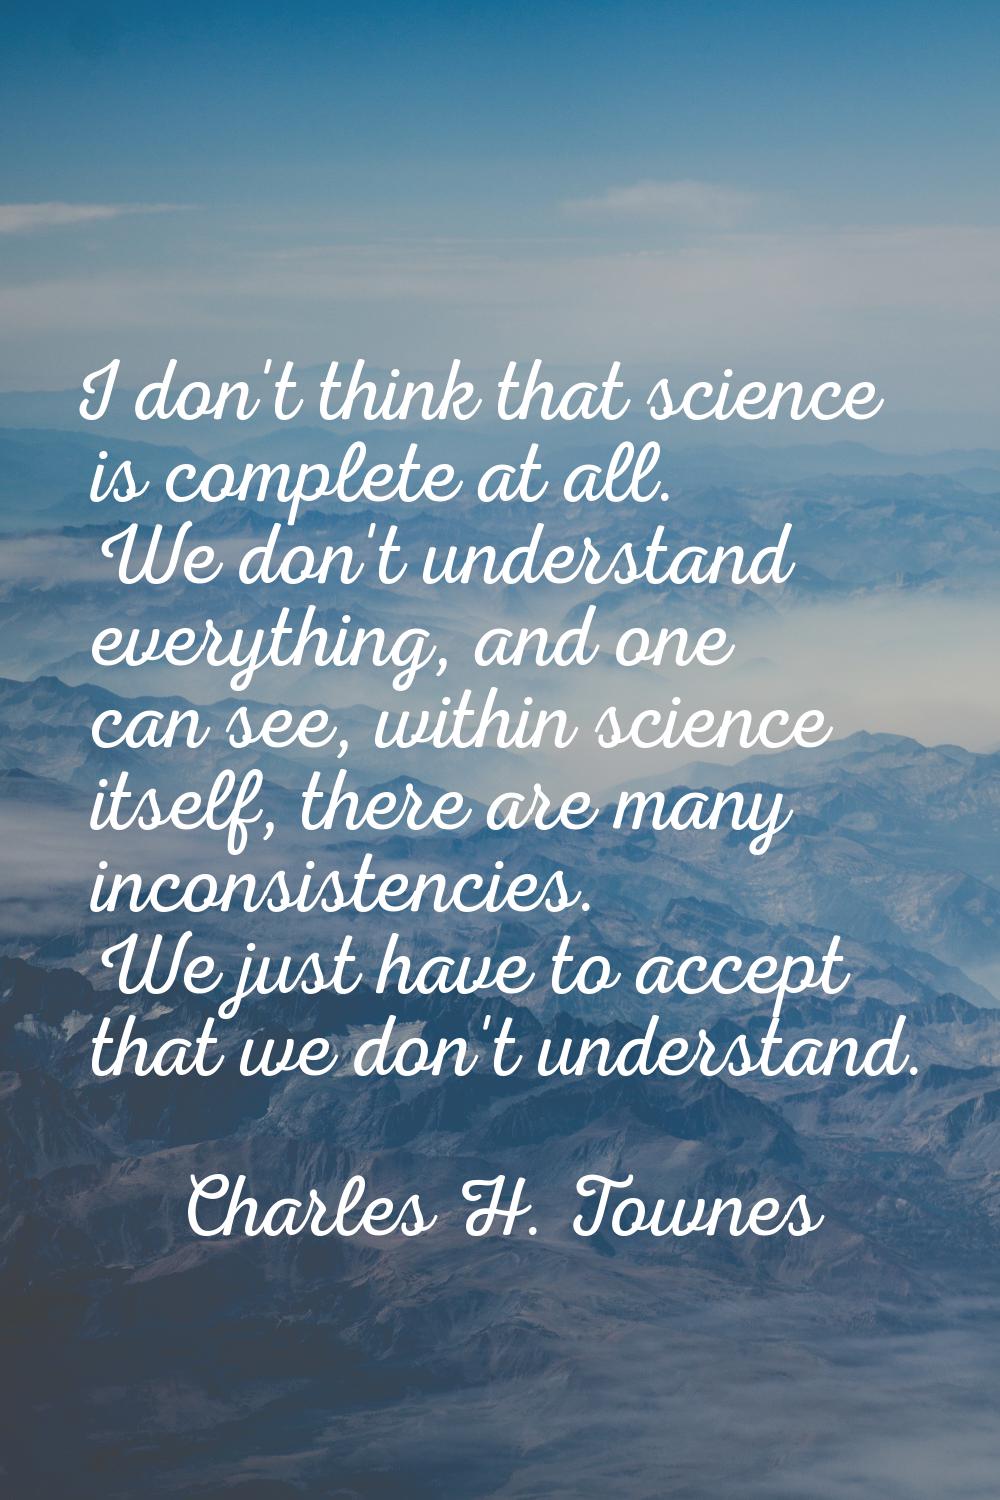 I don't think that science is complete at all. We don't understand everything, and one can see, wit